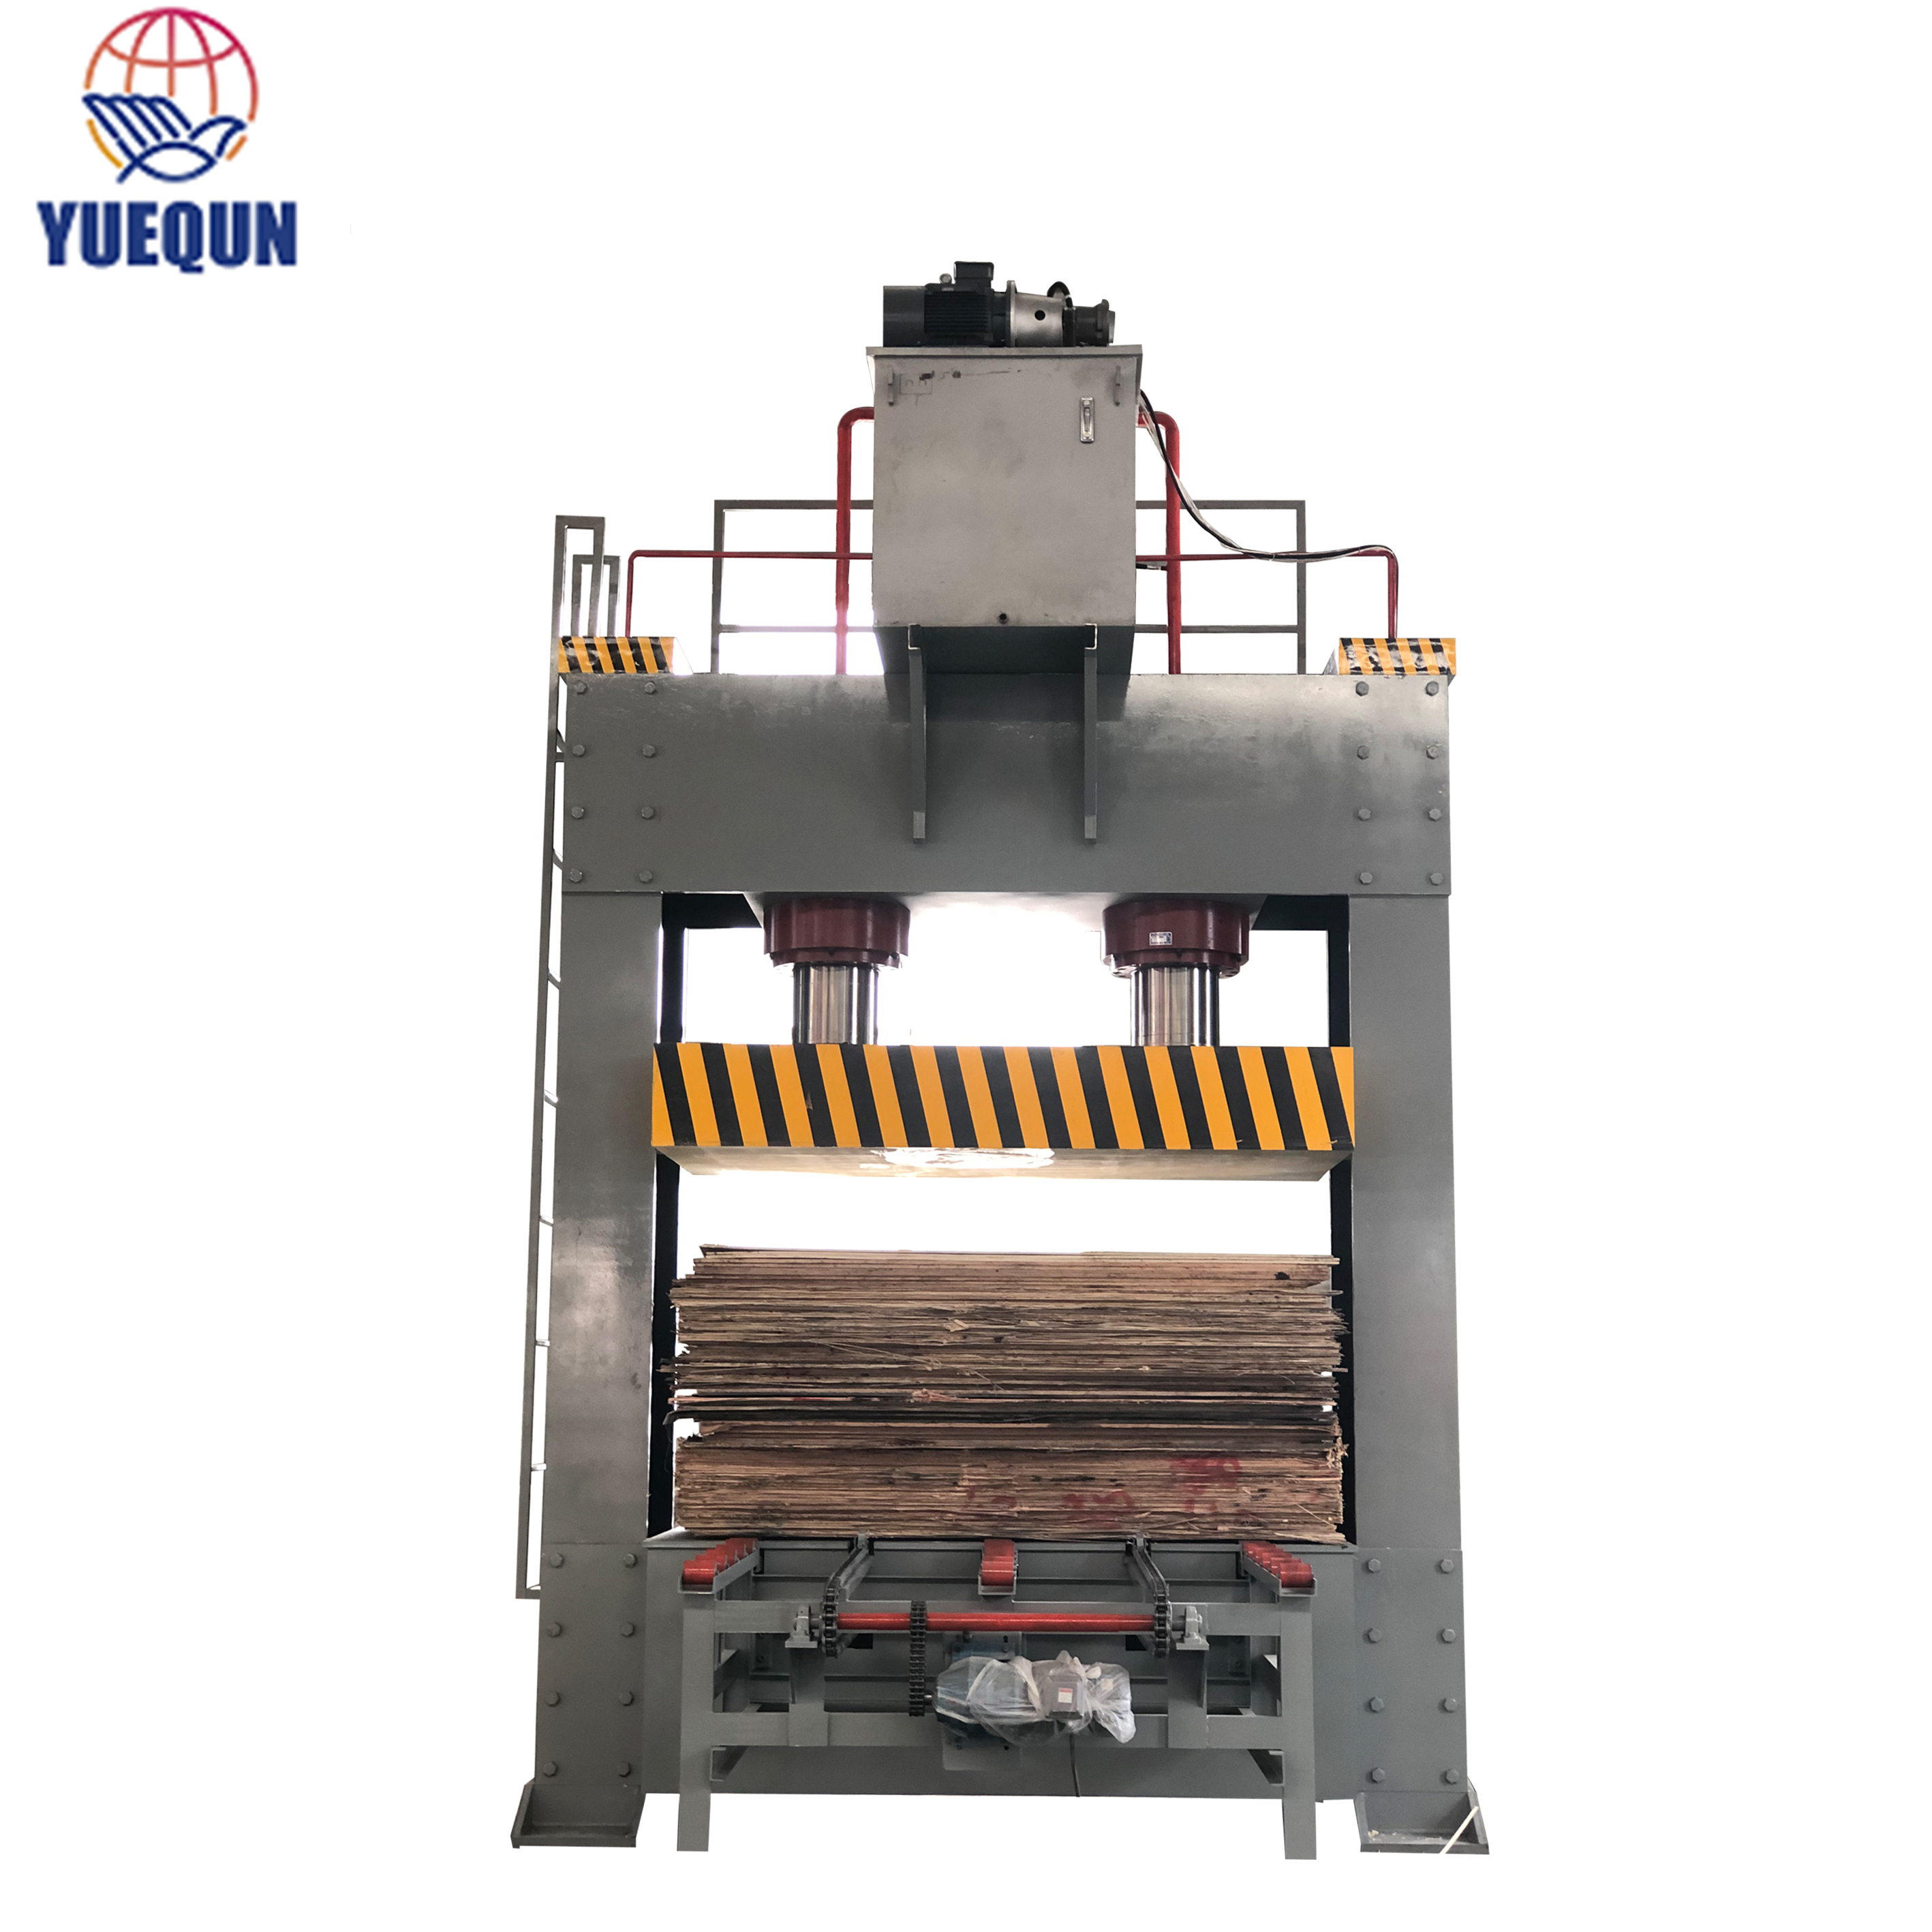 500T Woodworking Wood Laminate Hydraulic Cold Press Machine Good for Door Making